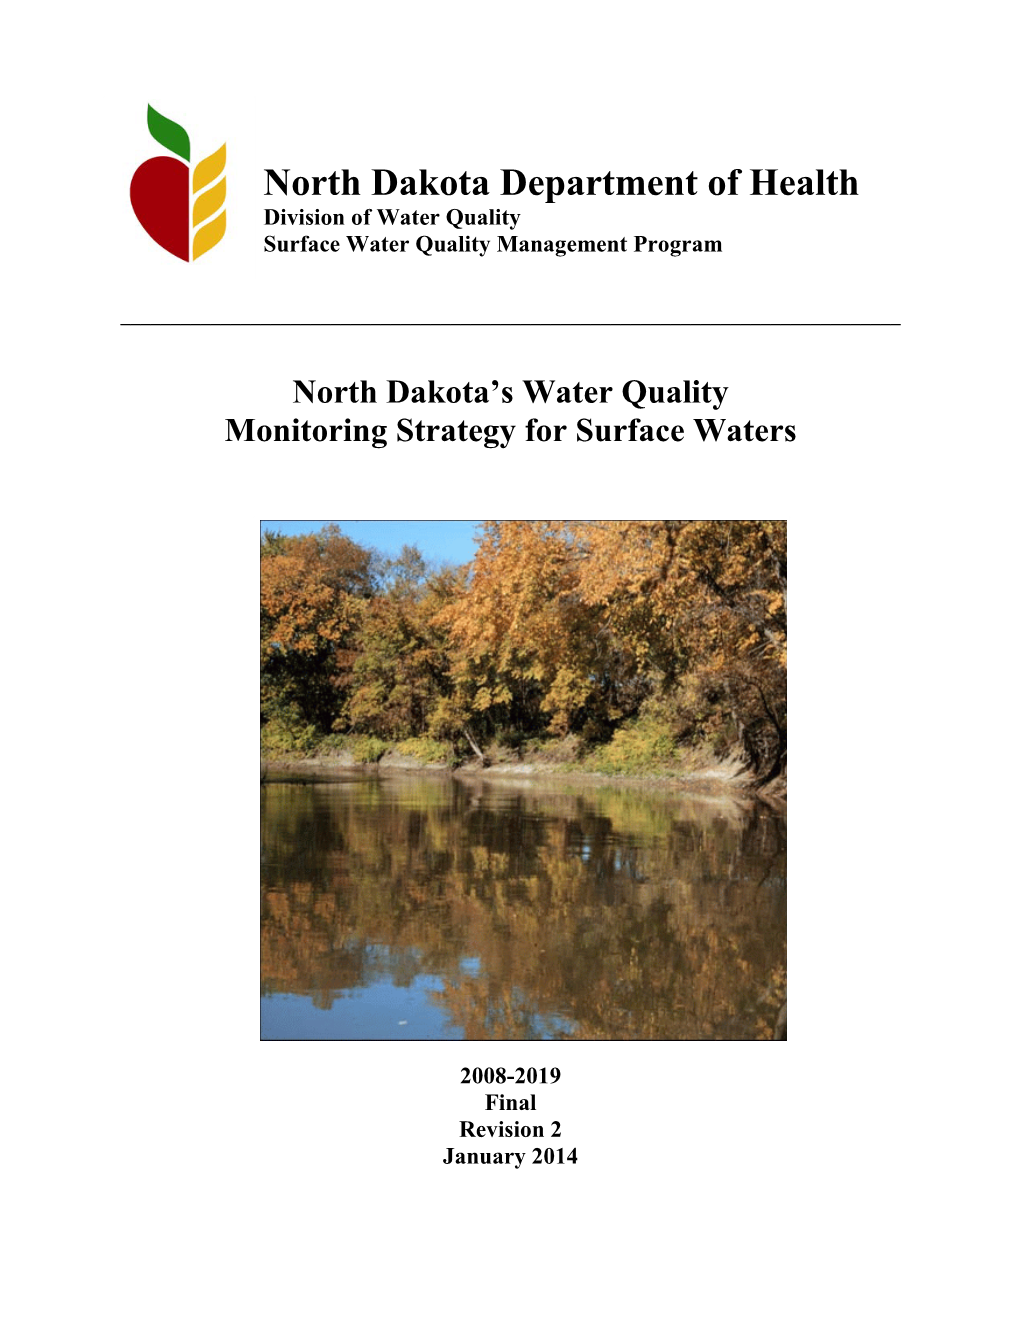 North Dakota's Water Quality Monitoring Strategy for Surface